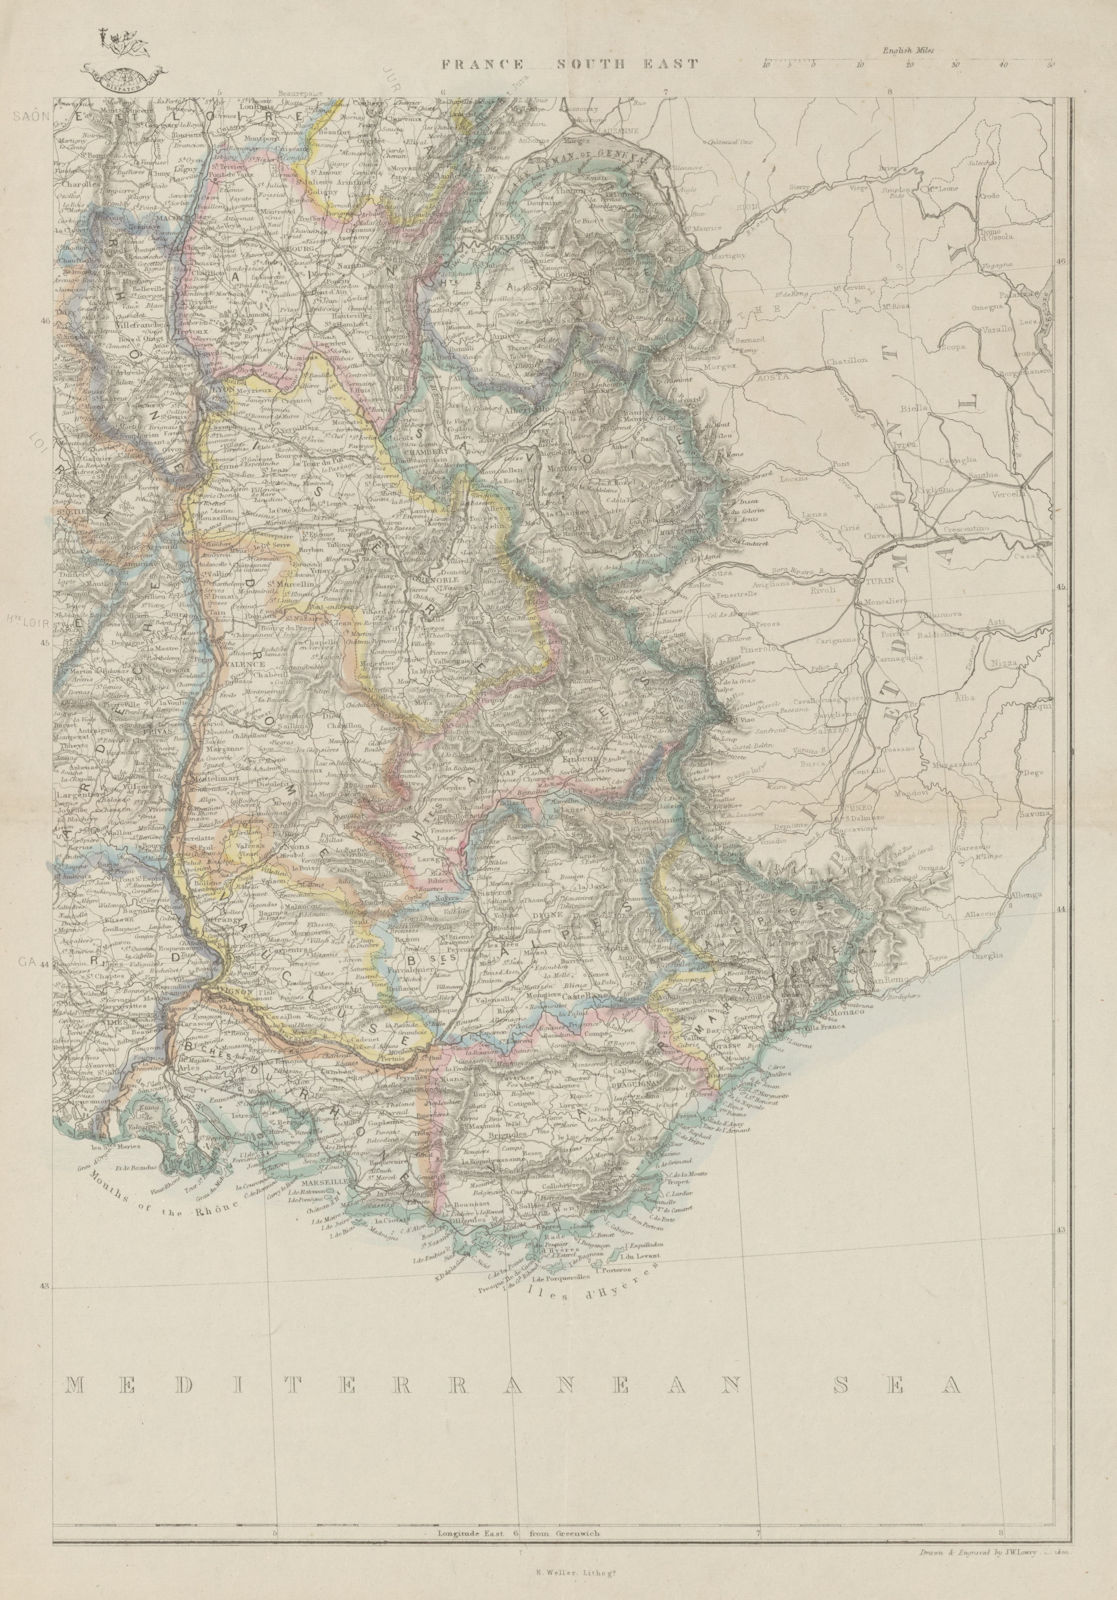 Associate Product FRANCE SOUTH EAST. Upon annexation of Savoie & Comte de Nice. JW LOWRY 1862 map